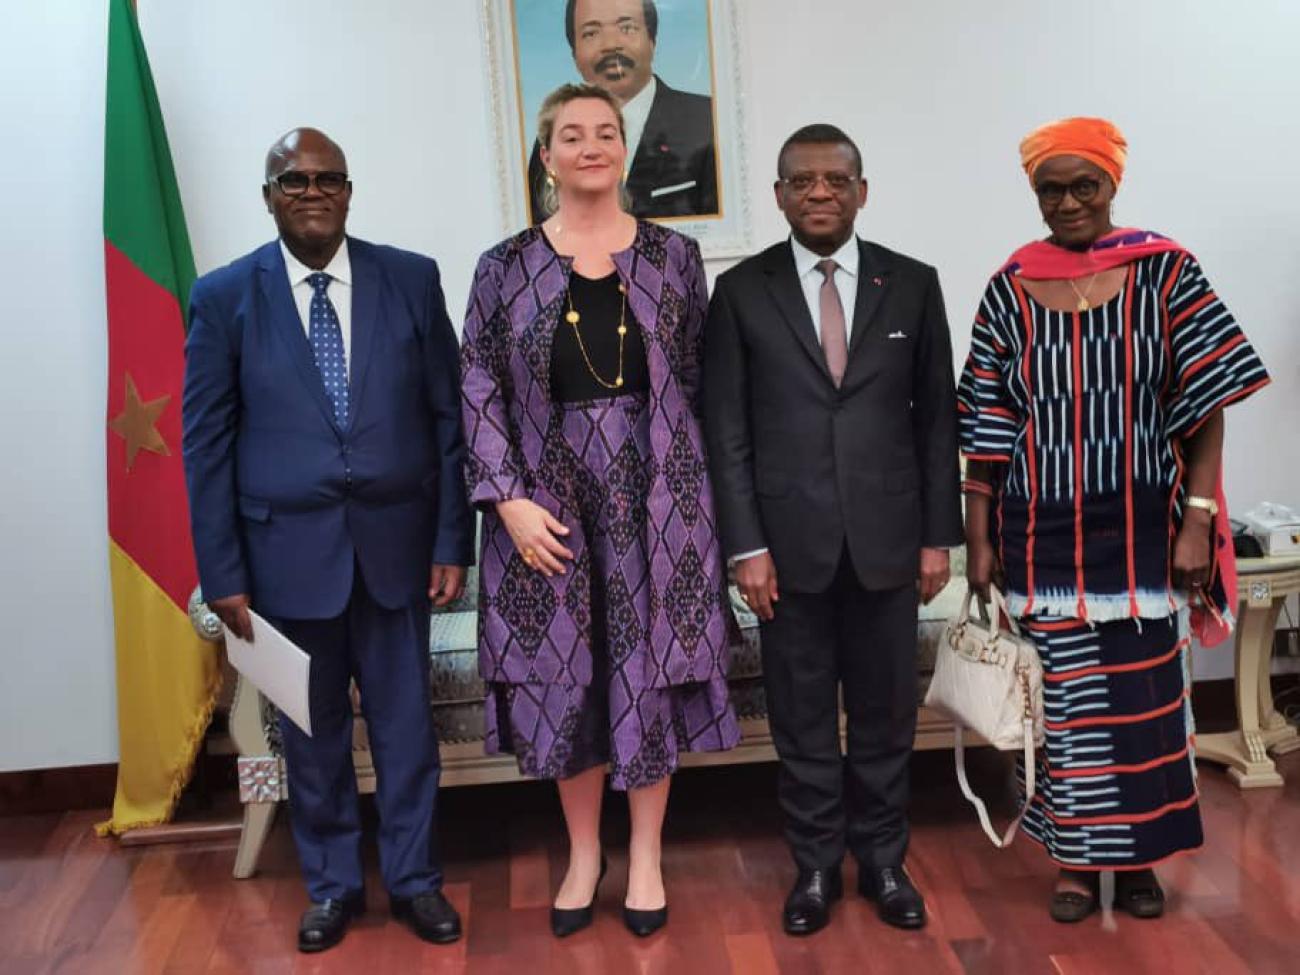 Ms, Florence visit to Joseph Dion NGUTE, Prime Minister of the Republic of Cameroon